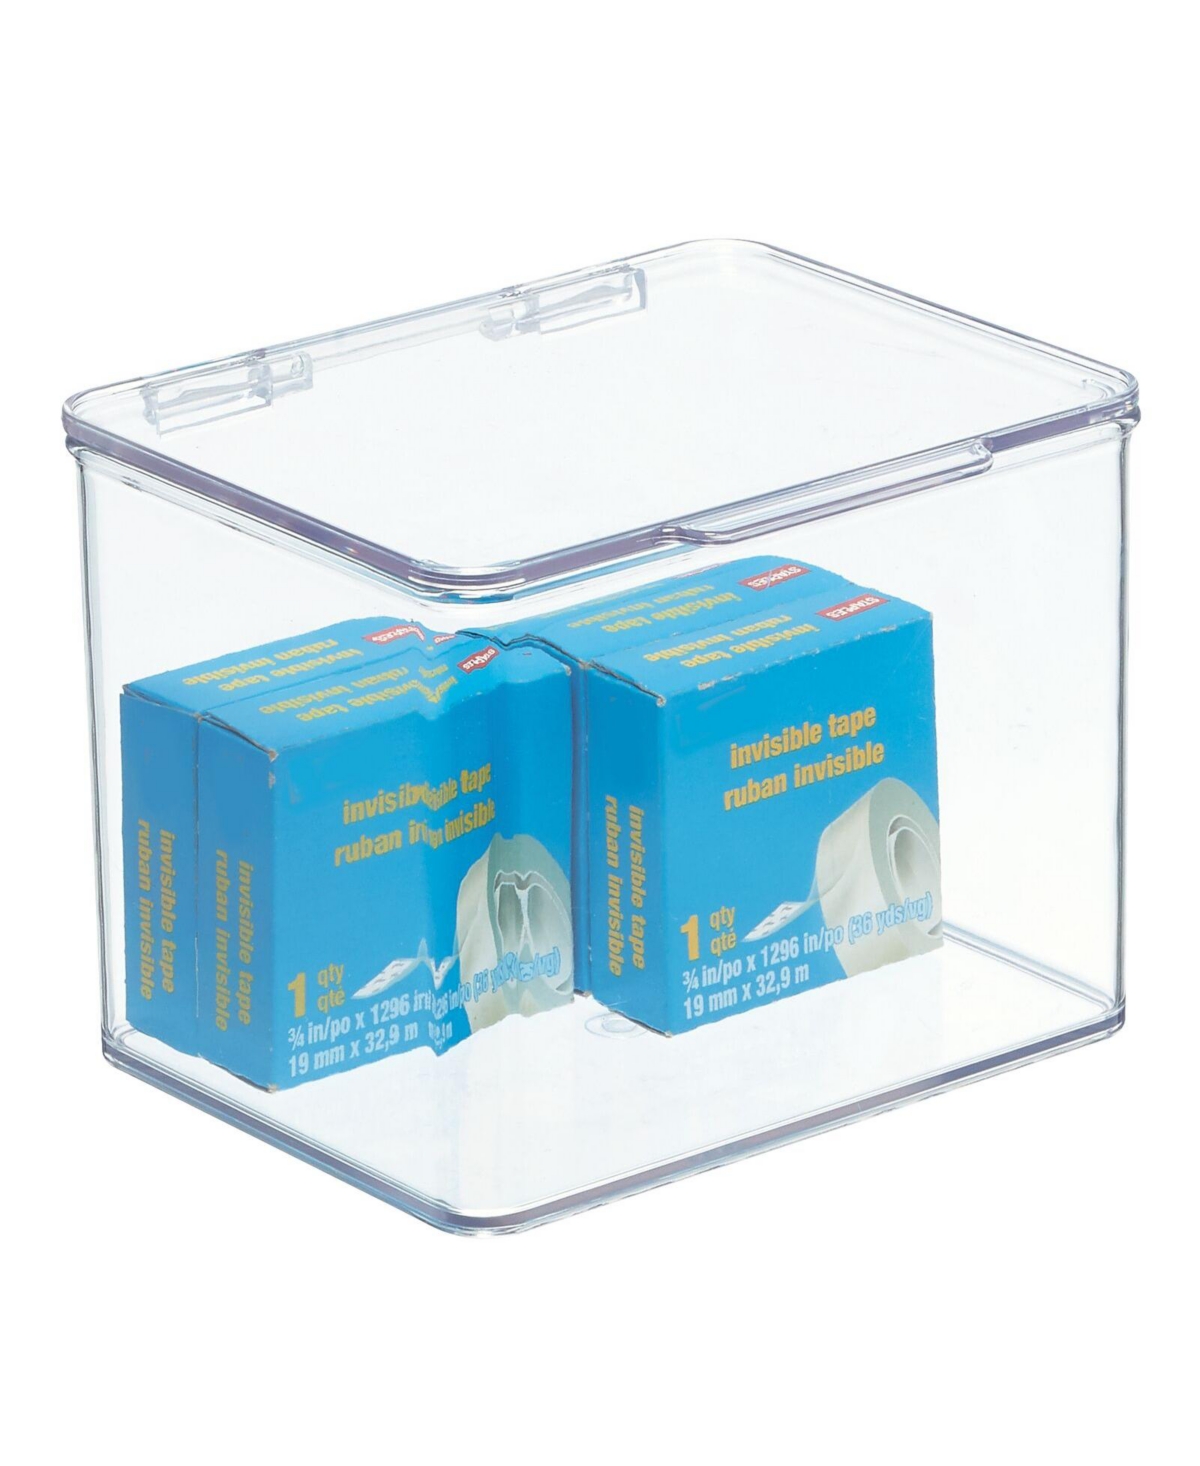 Plastic Home Office Storage Organizer Box with Hinged Lid - 5.5 x 6.6 x 5 - Clear